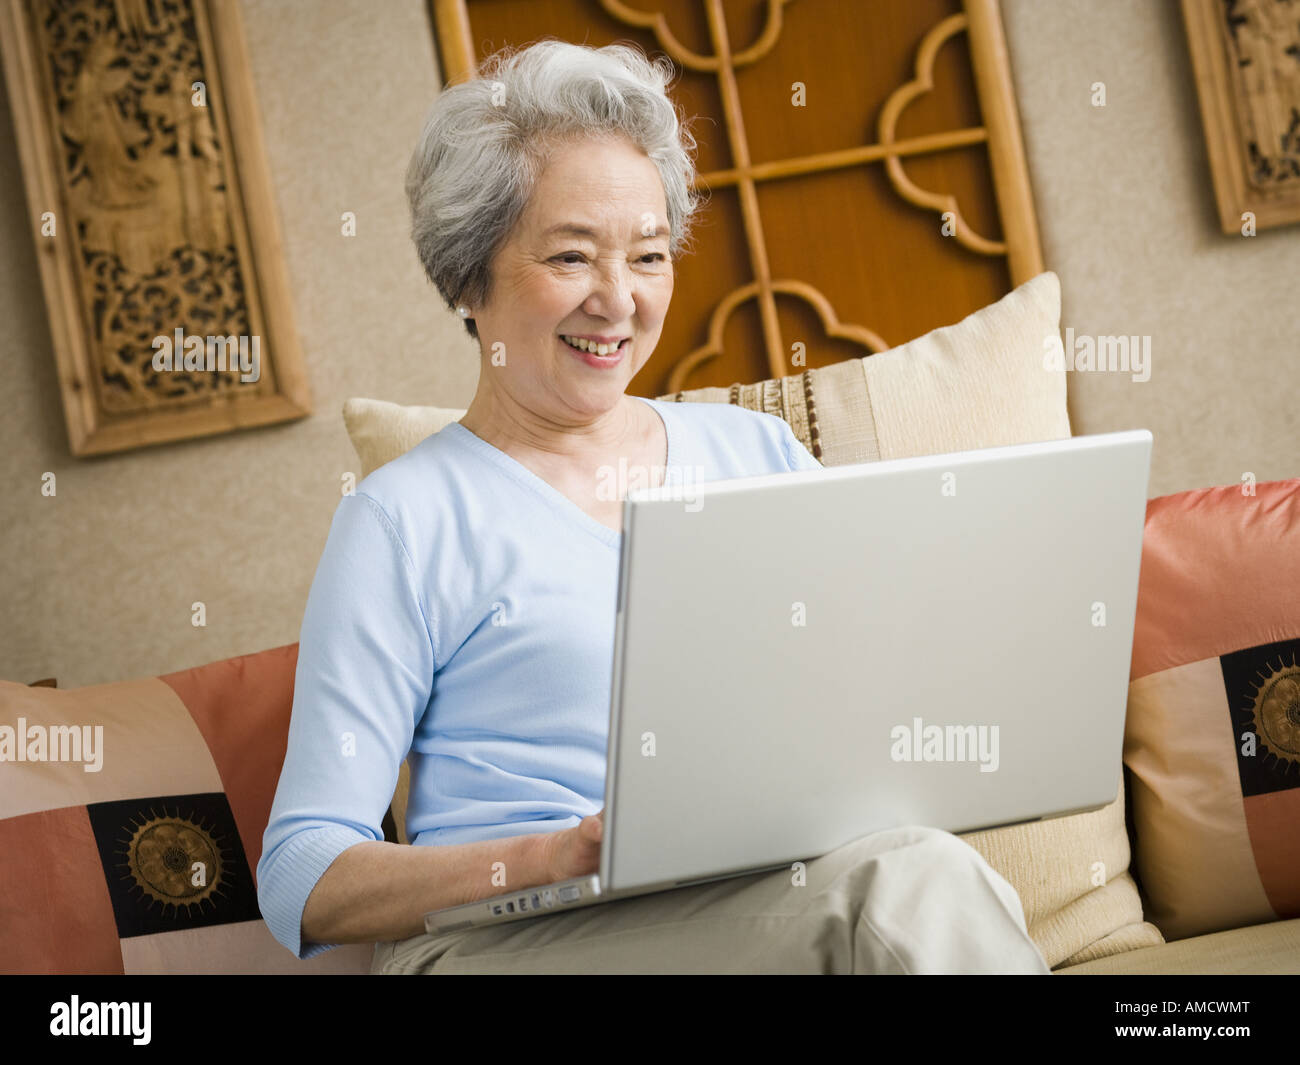 Woman sitting on sofa with laptop smiling Stock Photo